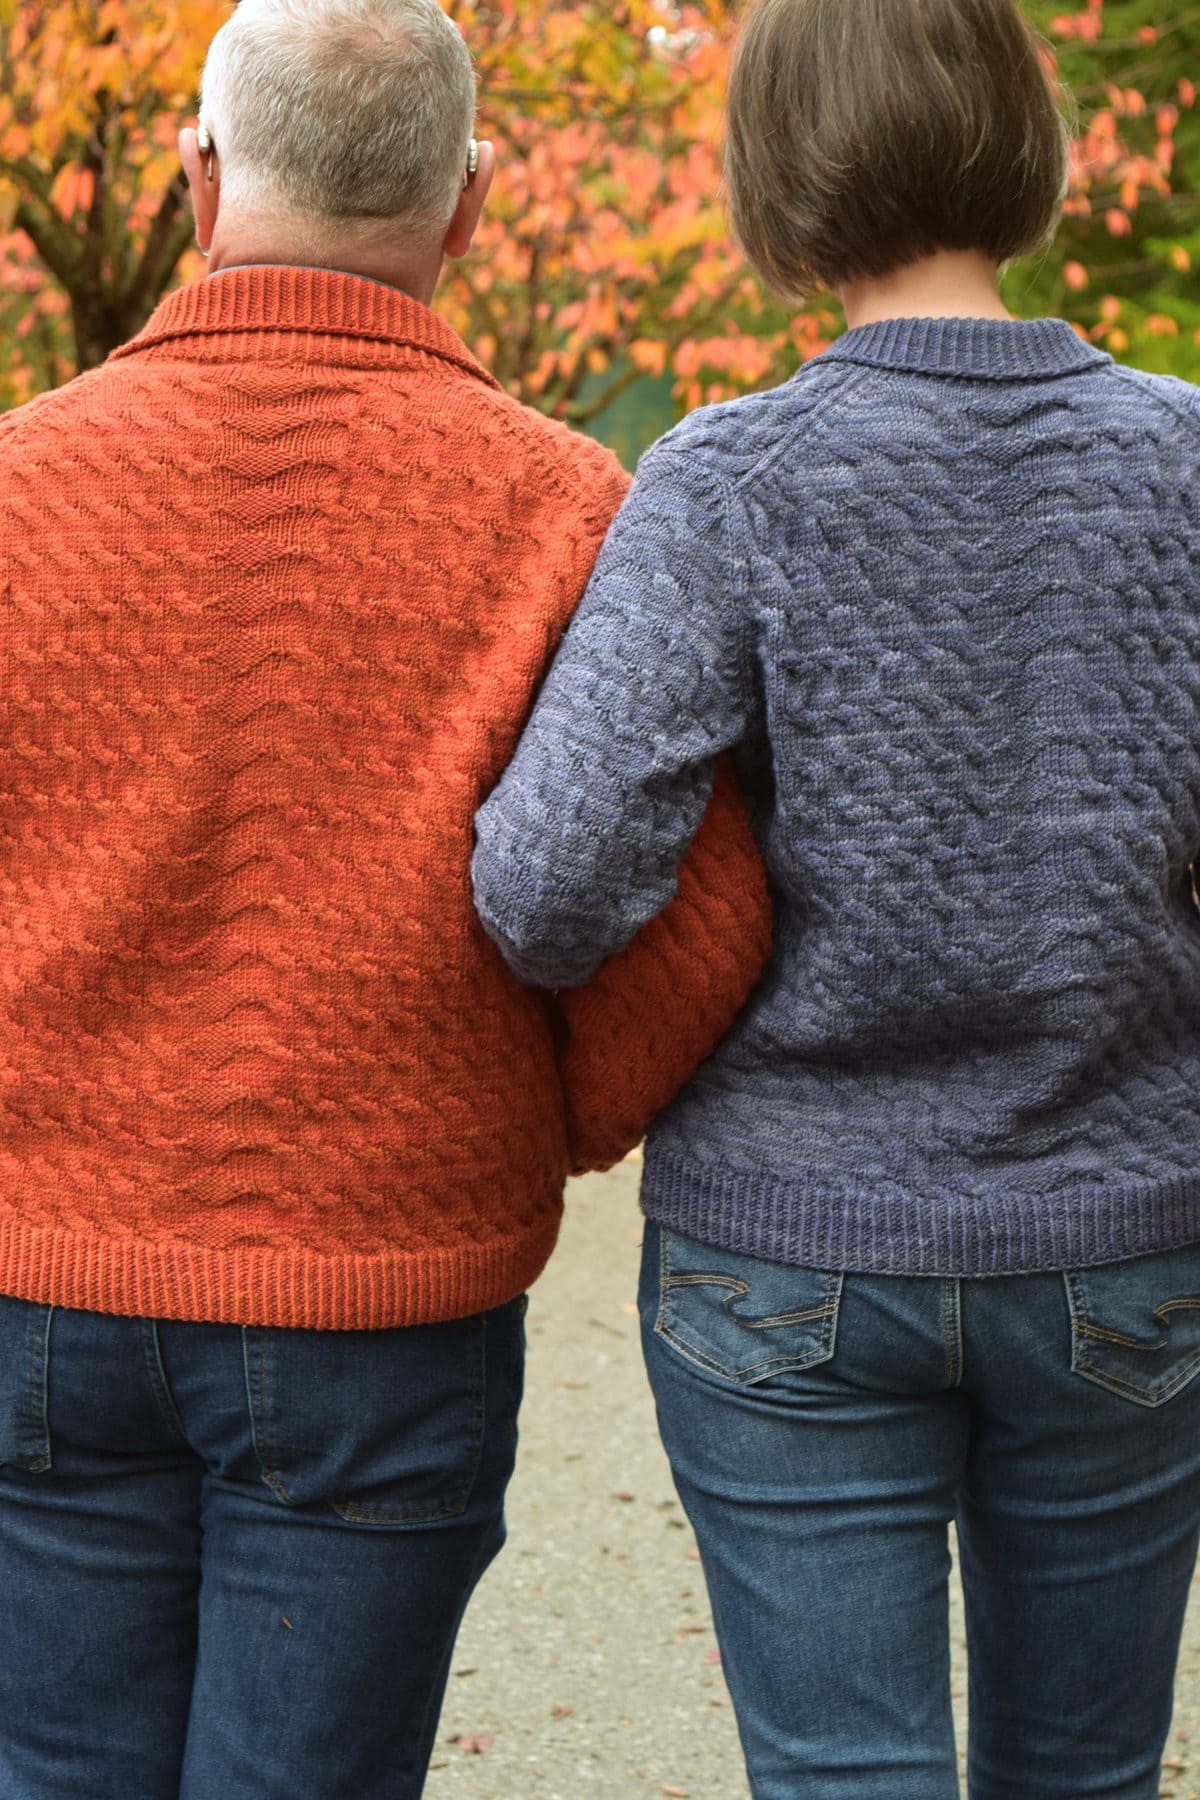 Image description: Man in orange sweater and woman in blue sweater, standing side by side with linked arms, seen from behind.